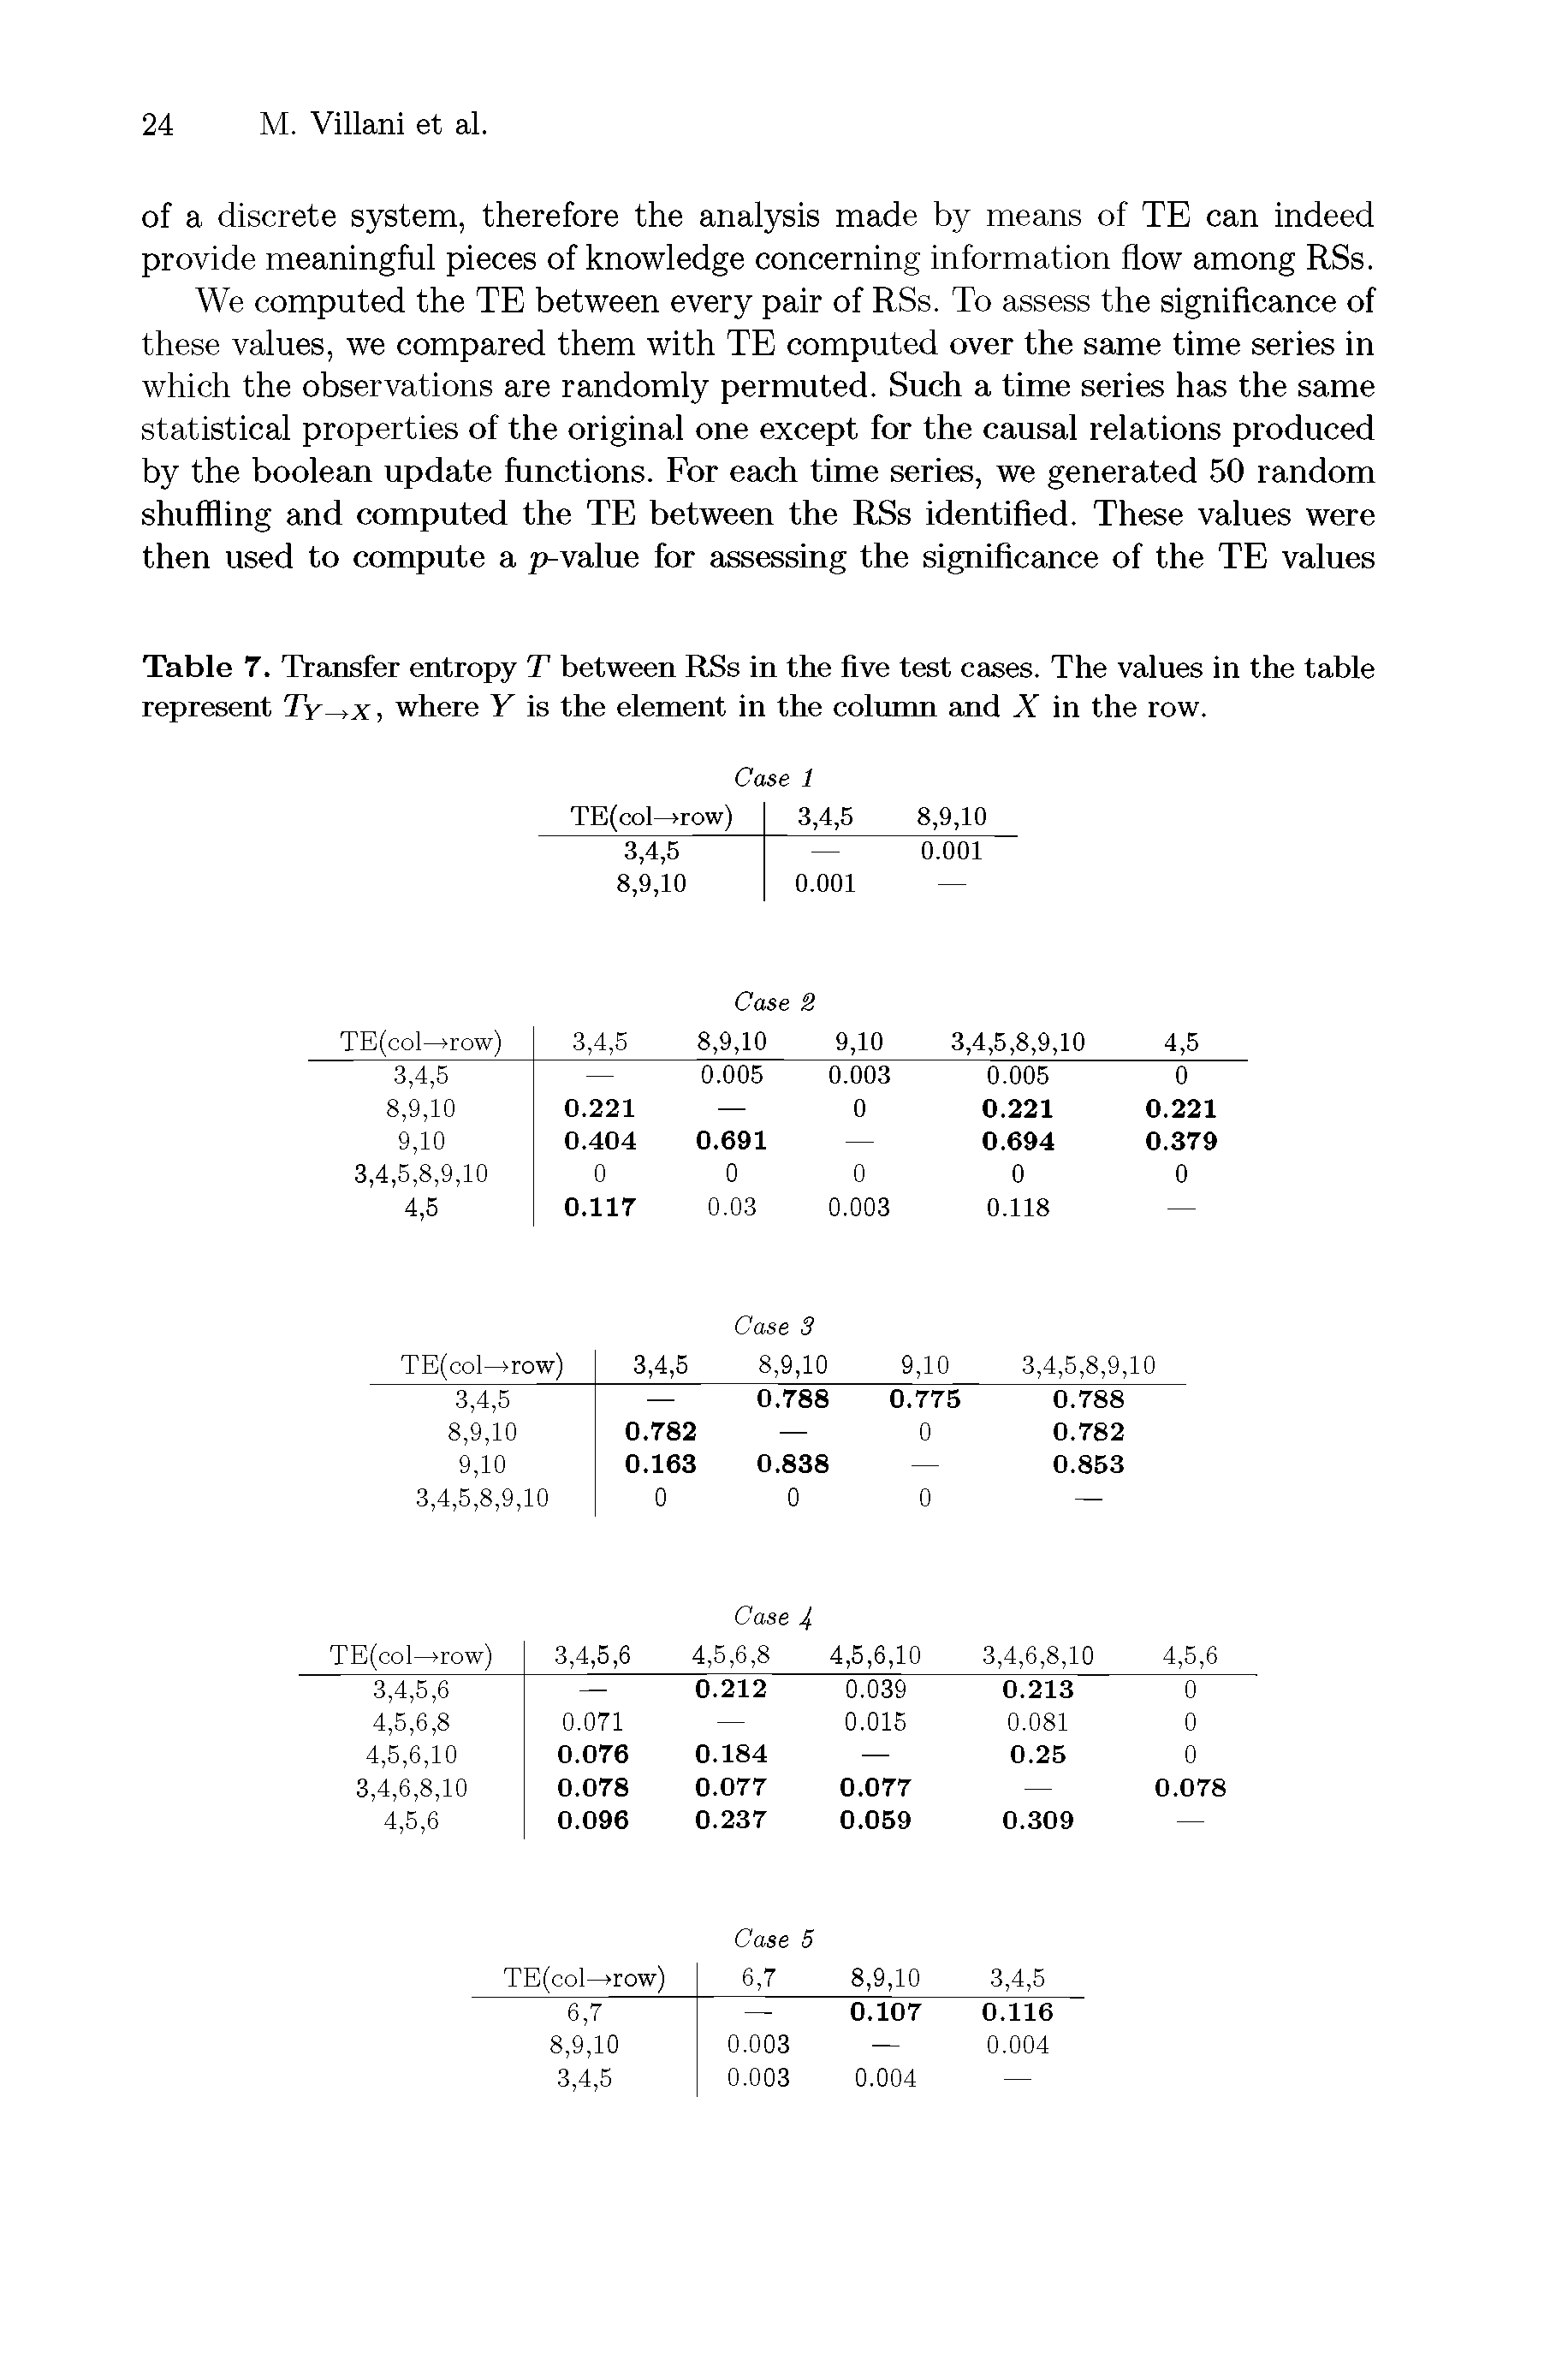 Table 7. Transfer entropy T between RSs in the five test cases. The values in the table represent Ty x, where Y is the element in the column and X in the row.